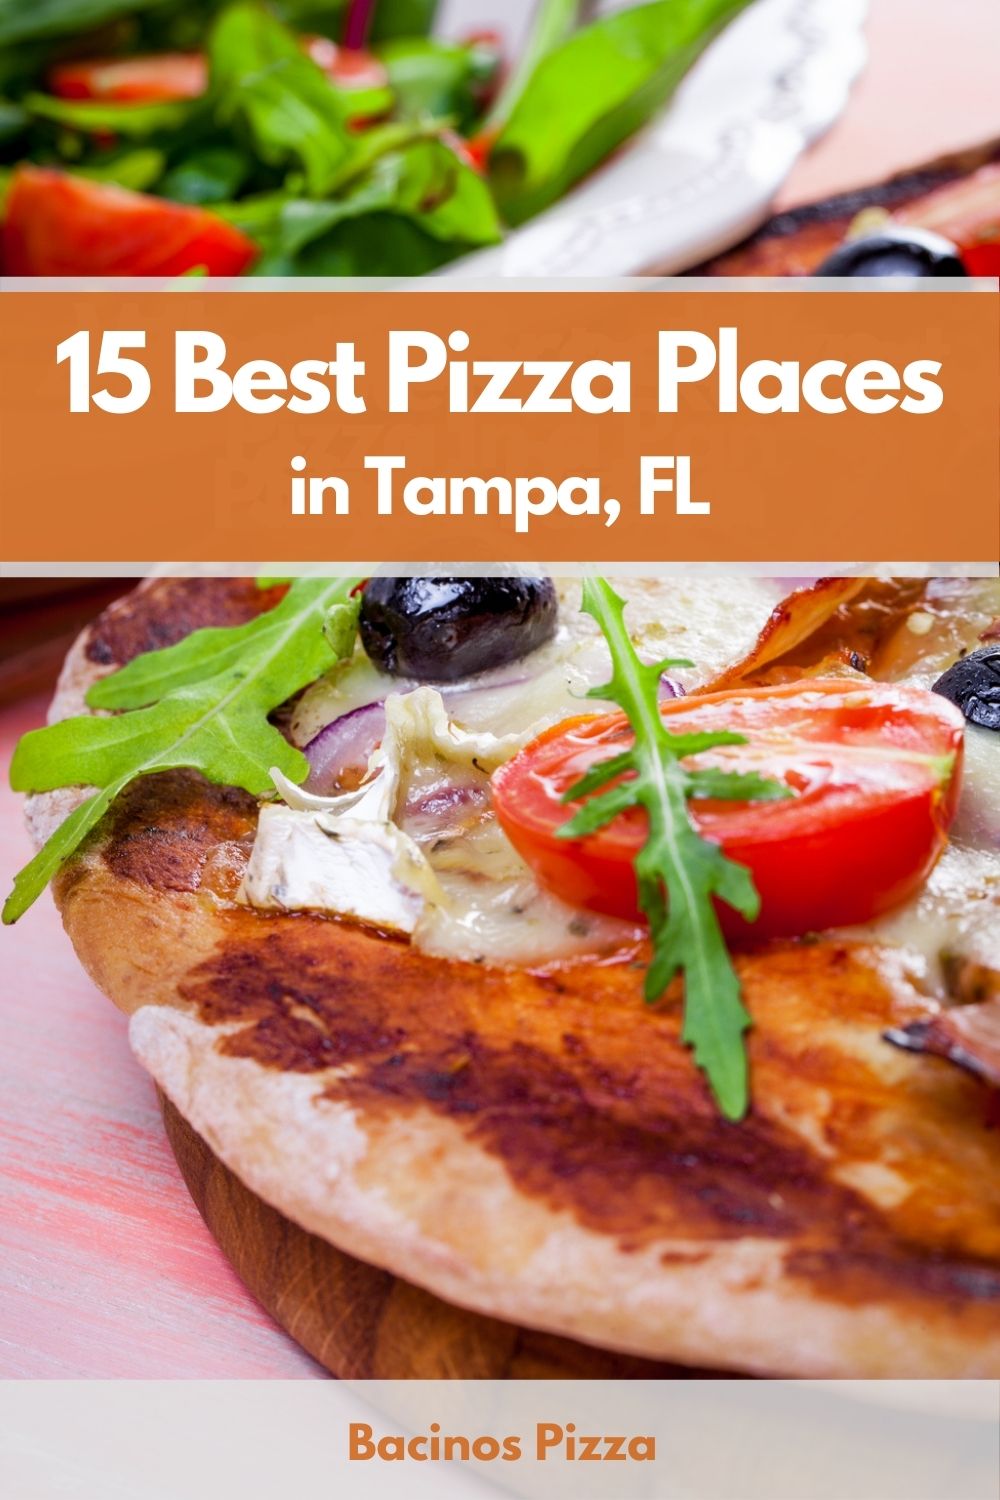 15 Best Pizza Places in Tampa, FL pin 2